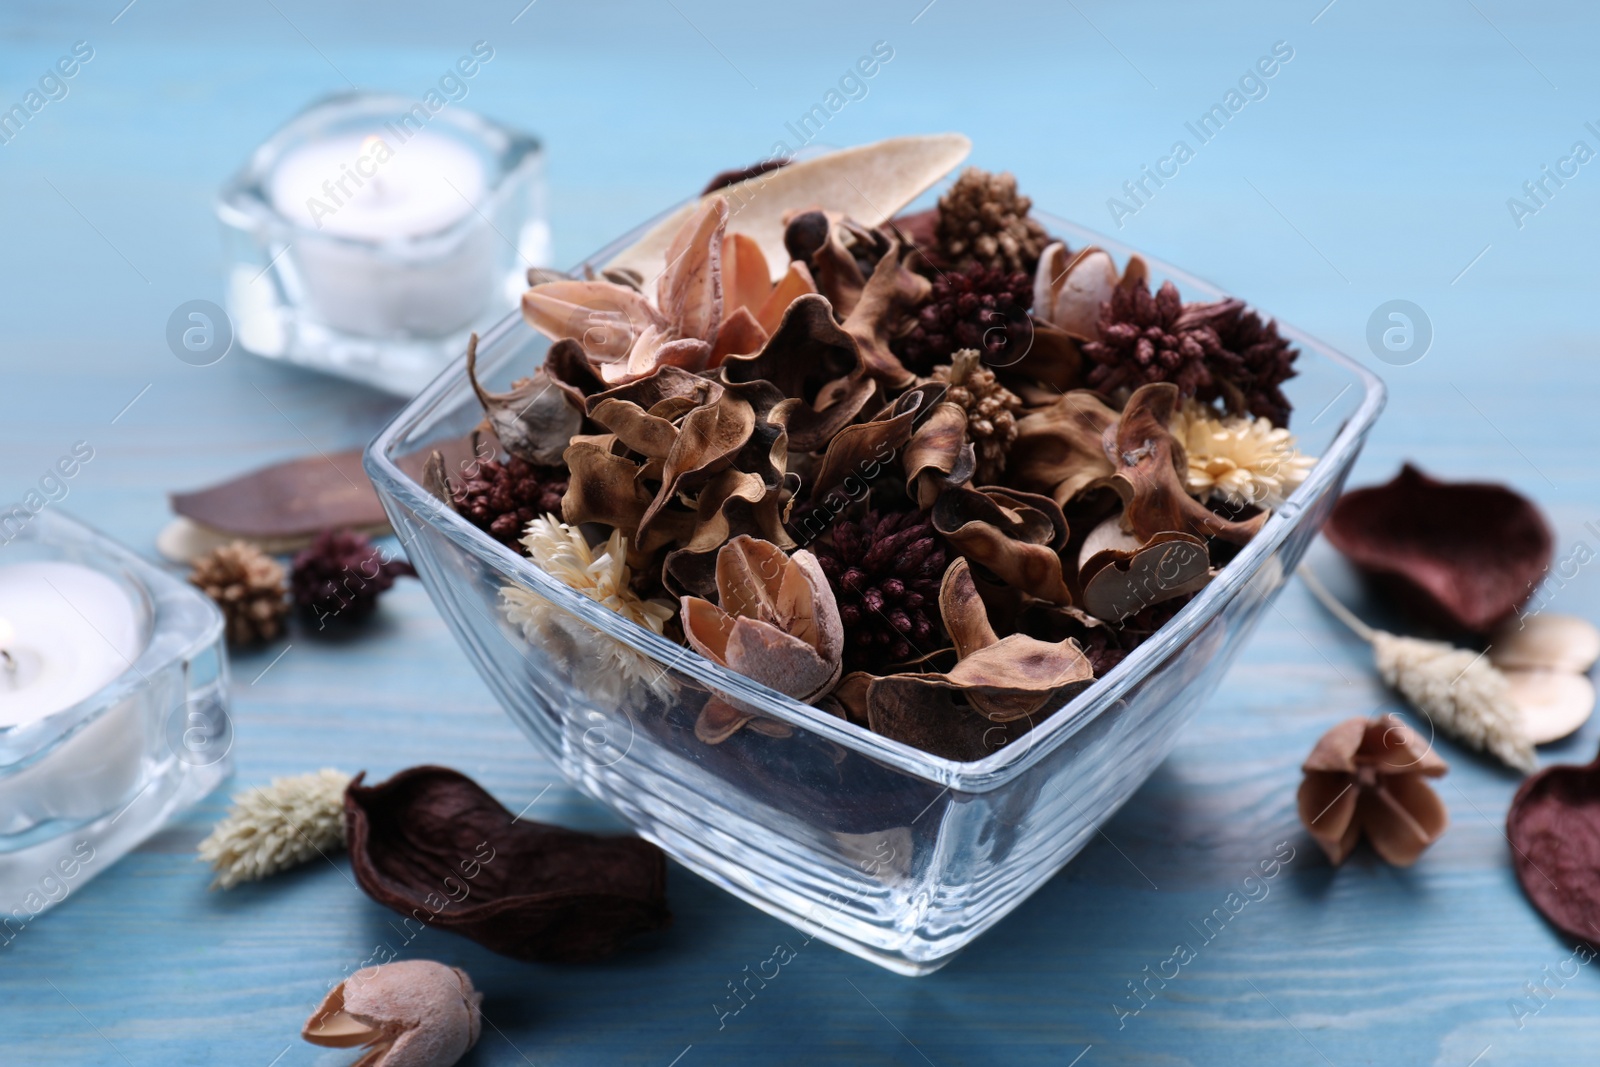 Photo of Aromatic potpourri of dried flowers in glass bowl on light blue wooden table